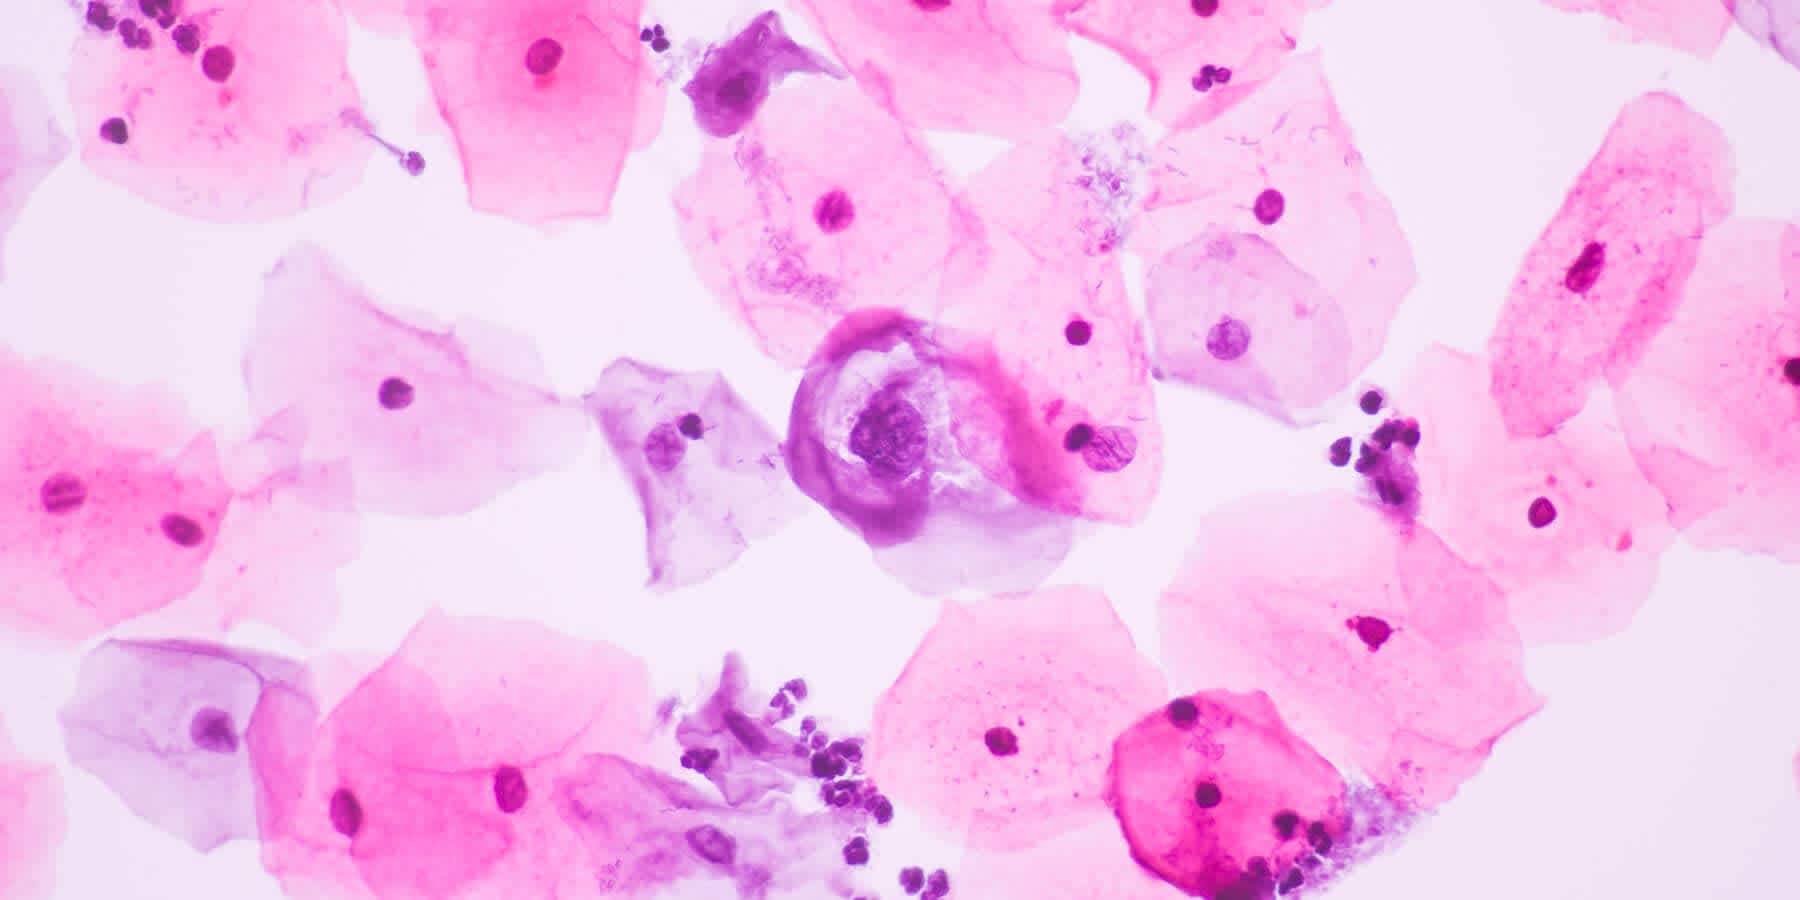 Microscopic image of cells with HPV infection that can result in HPV complications